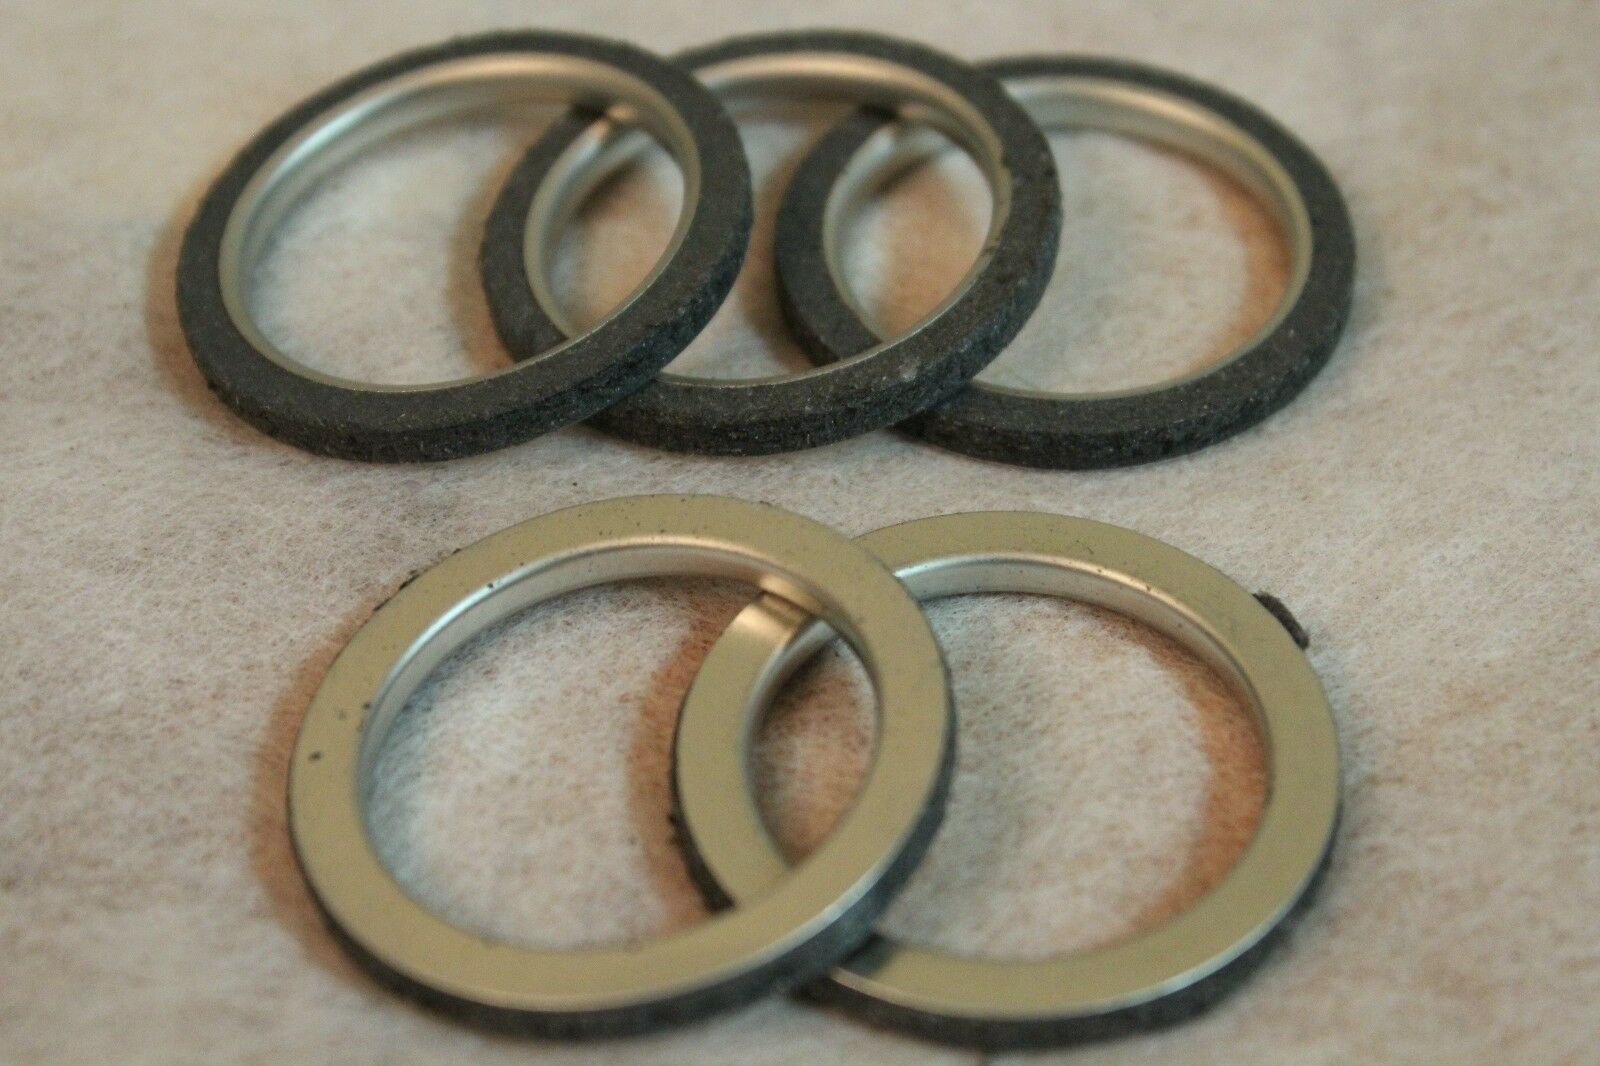 Lot 5 Exhaust Pipe Gasket For Gy6 50cc 125 150cc Scooter Atv Moped Bikes Motors